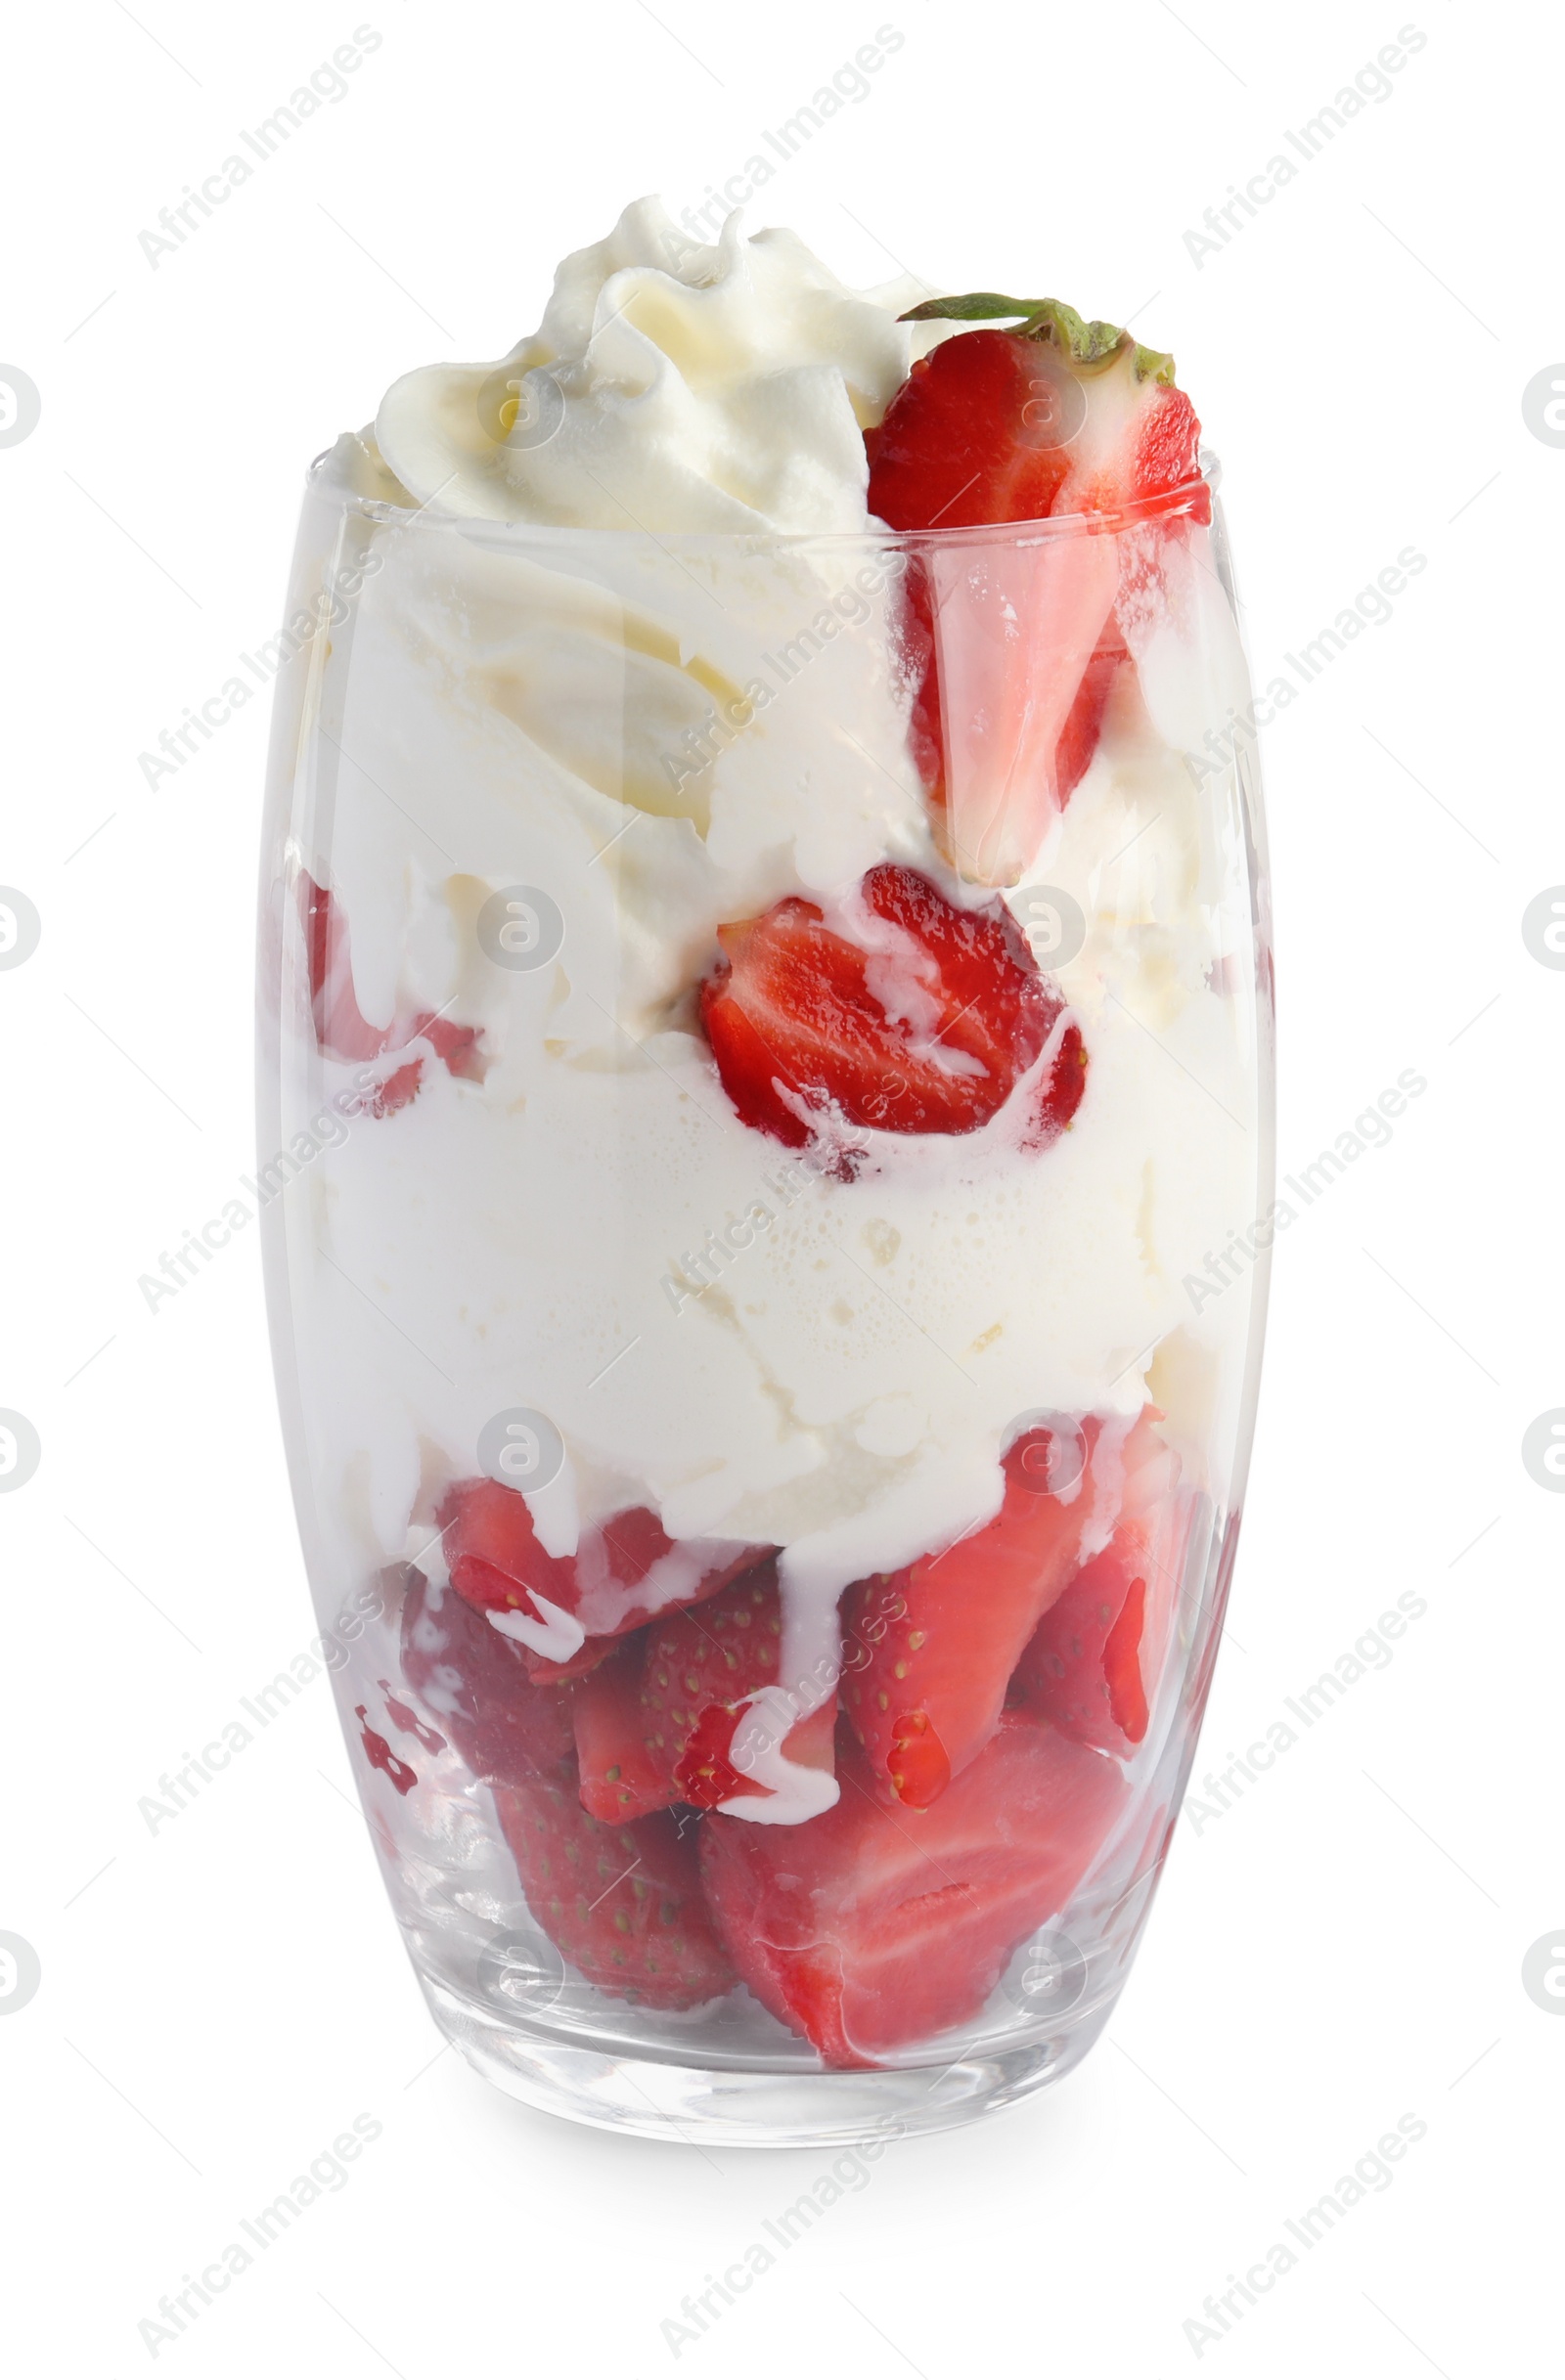 Photo of Tasty dessert of fresh strawberries and whipped cream in glass isolated on white